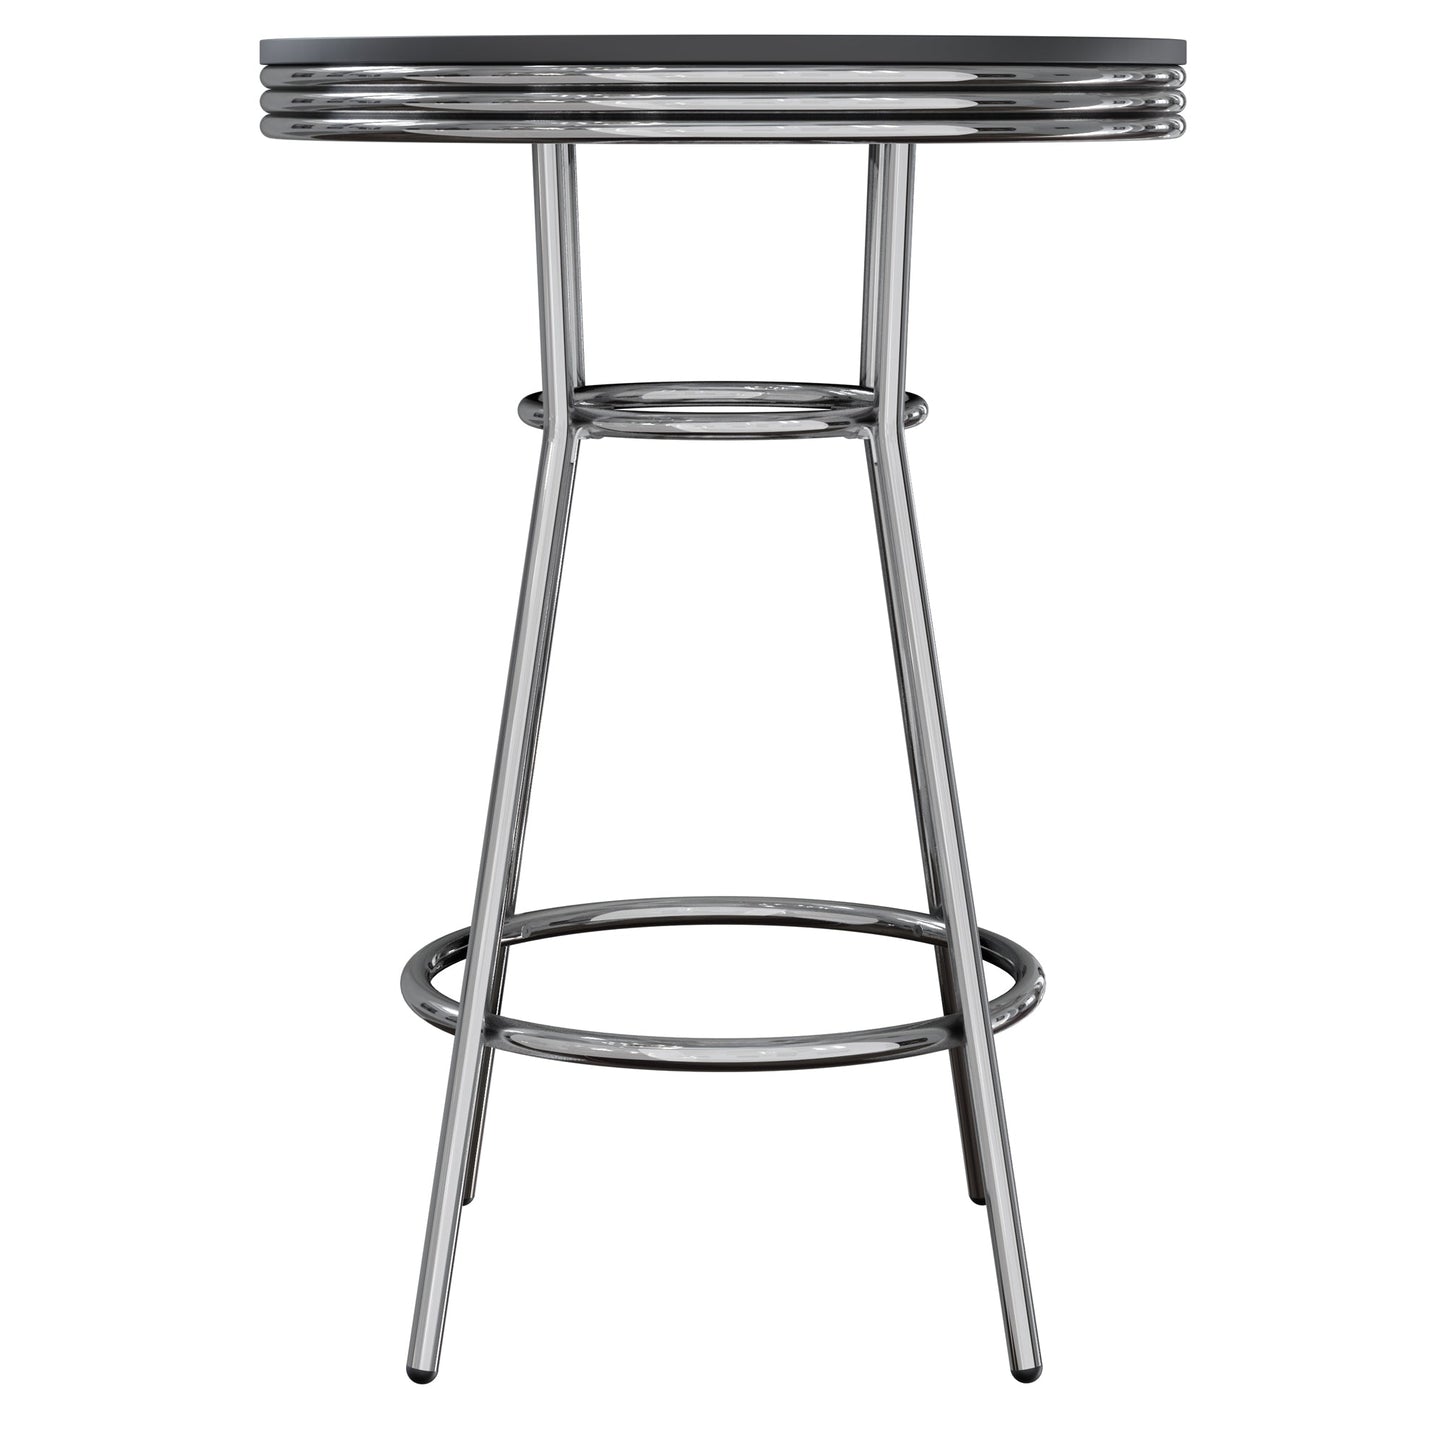 Winesome Wood Summit Bar Height Table, Black and Chrome - The Bar Design